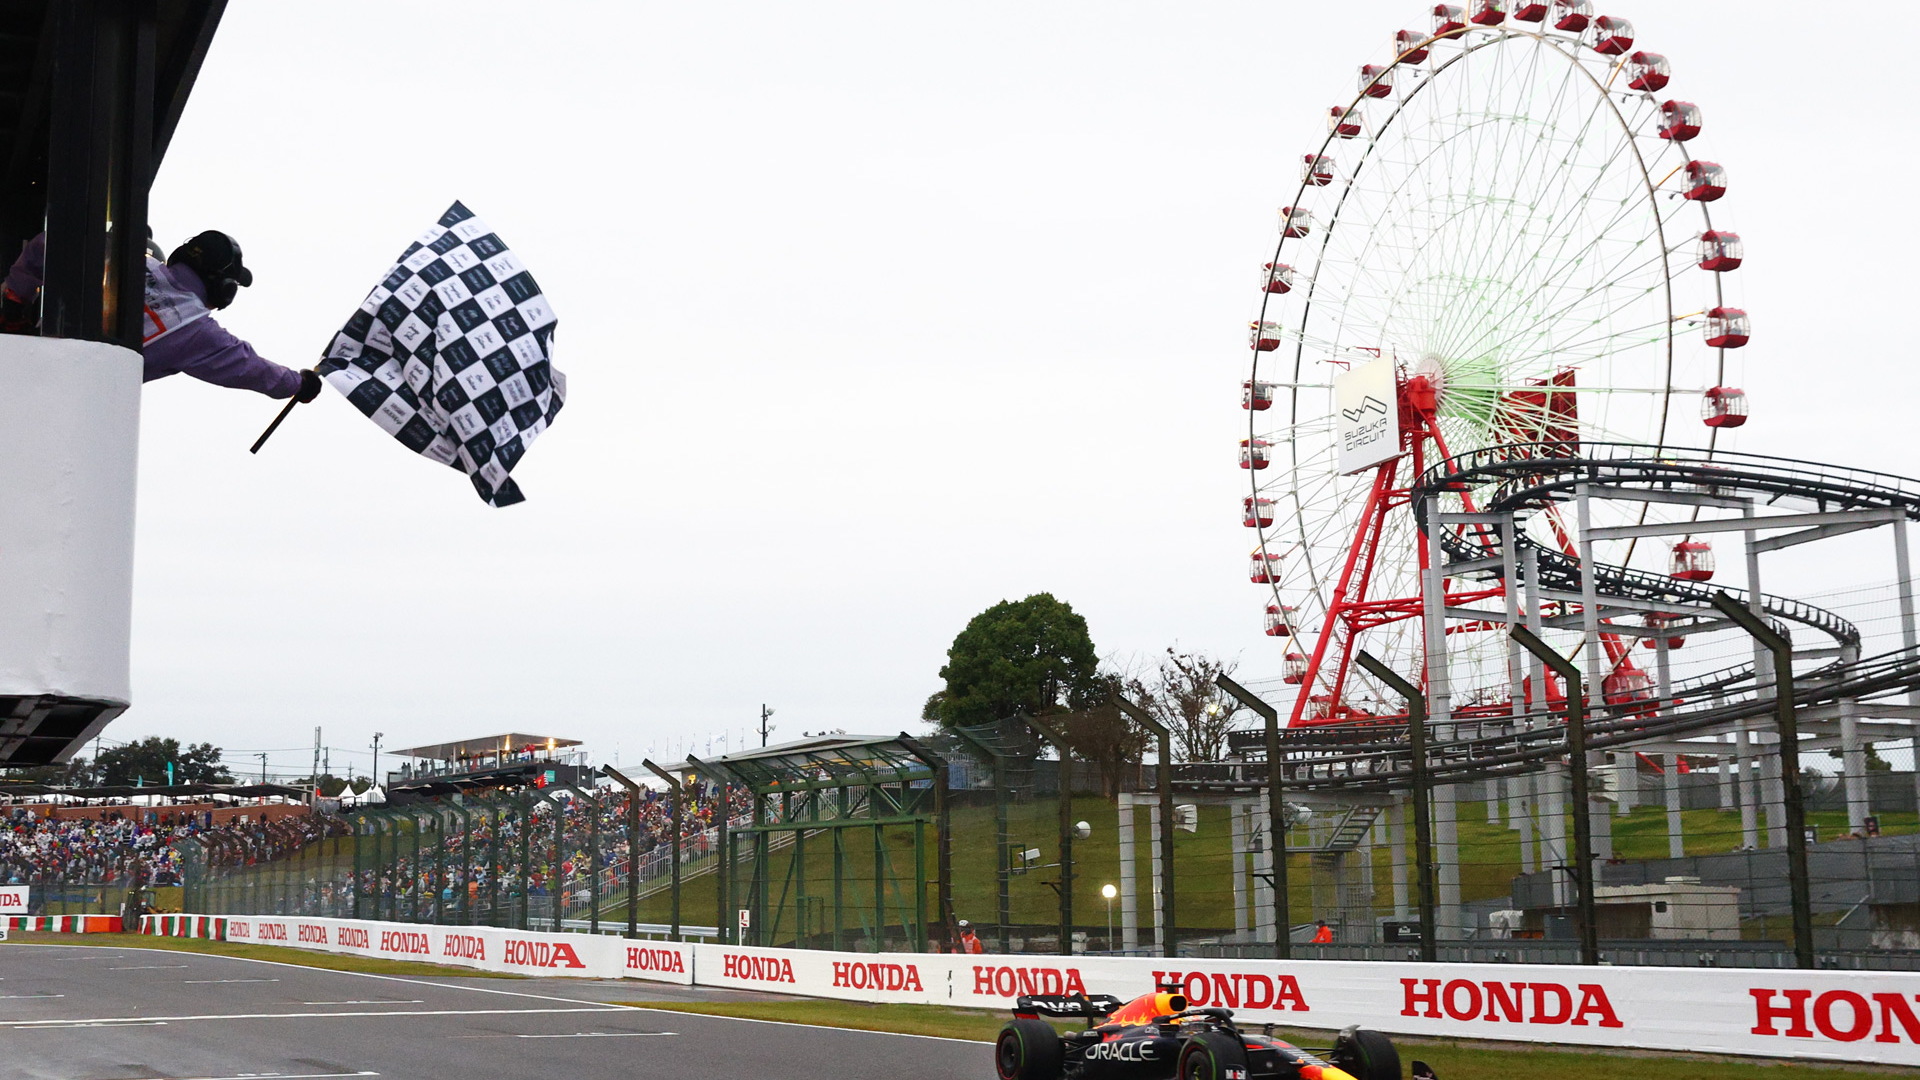 Max Verstappen at the 2022 Formula 1 Japanese Grand Prix - Photo credit: Getty Images